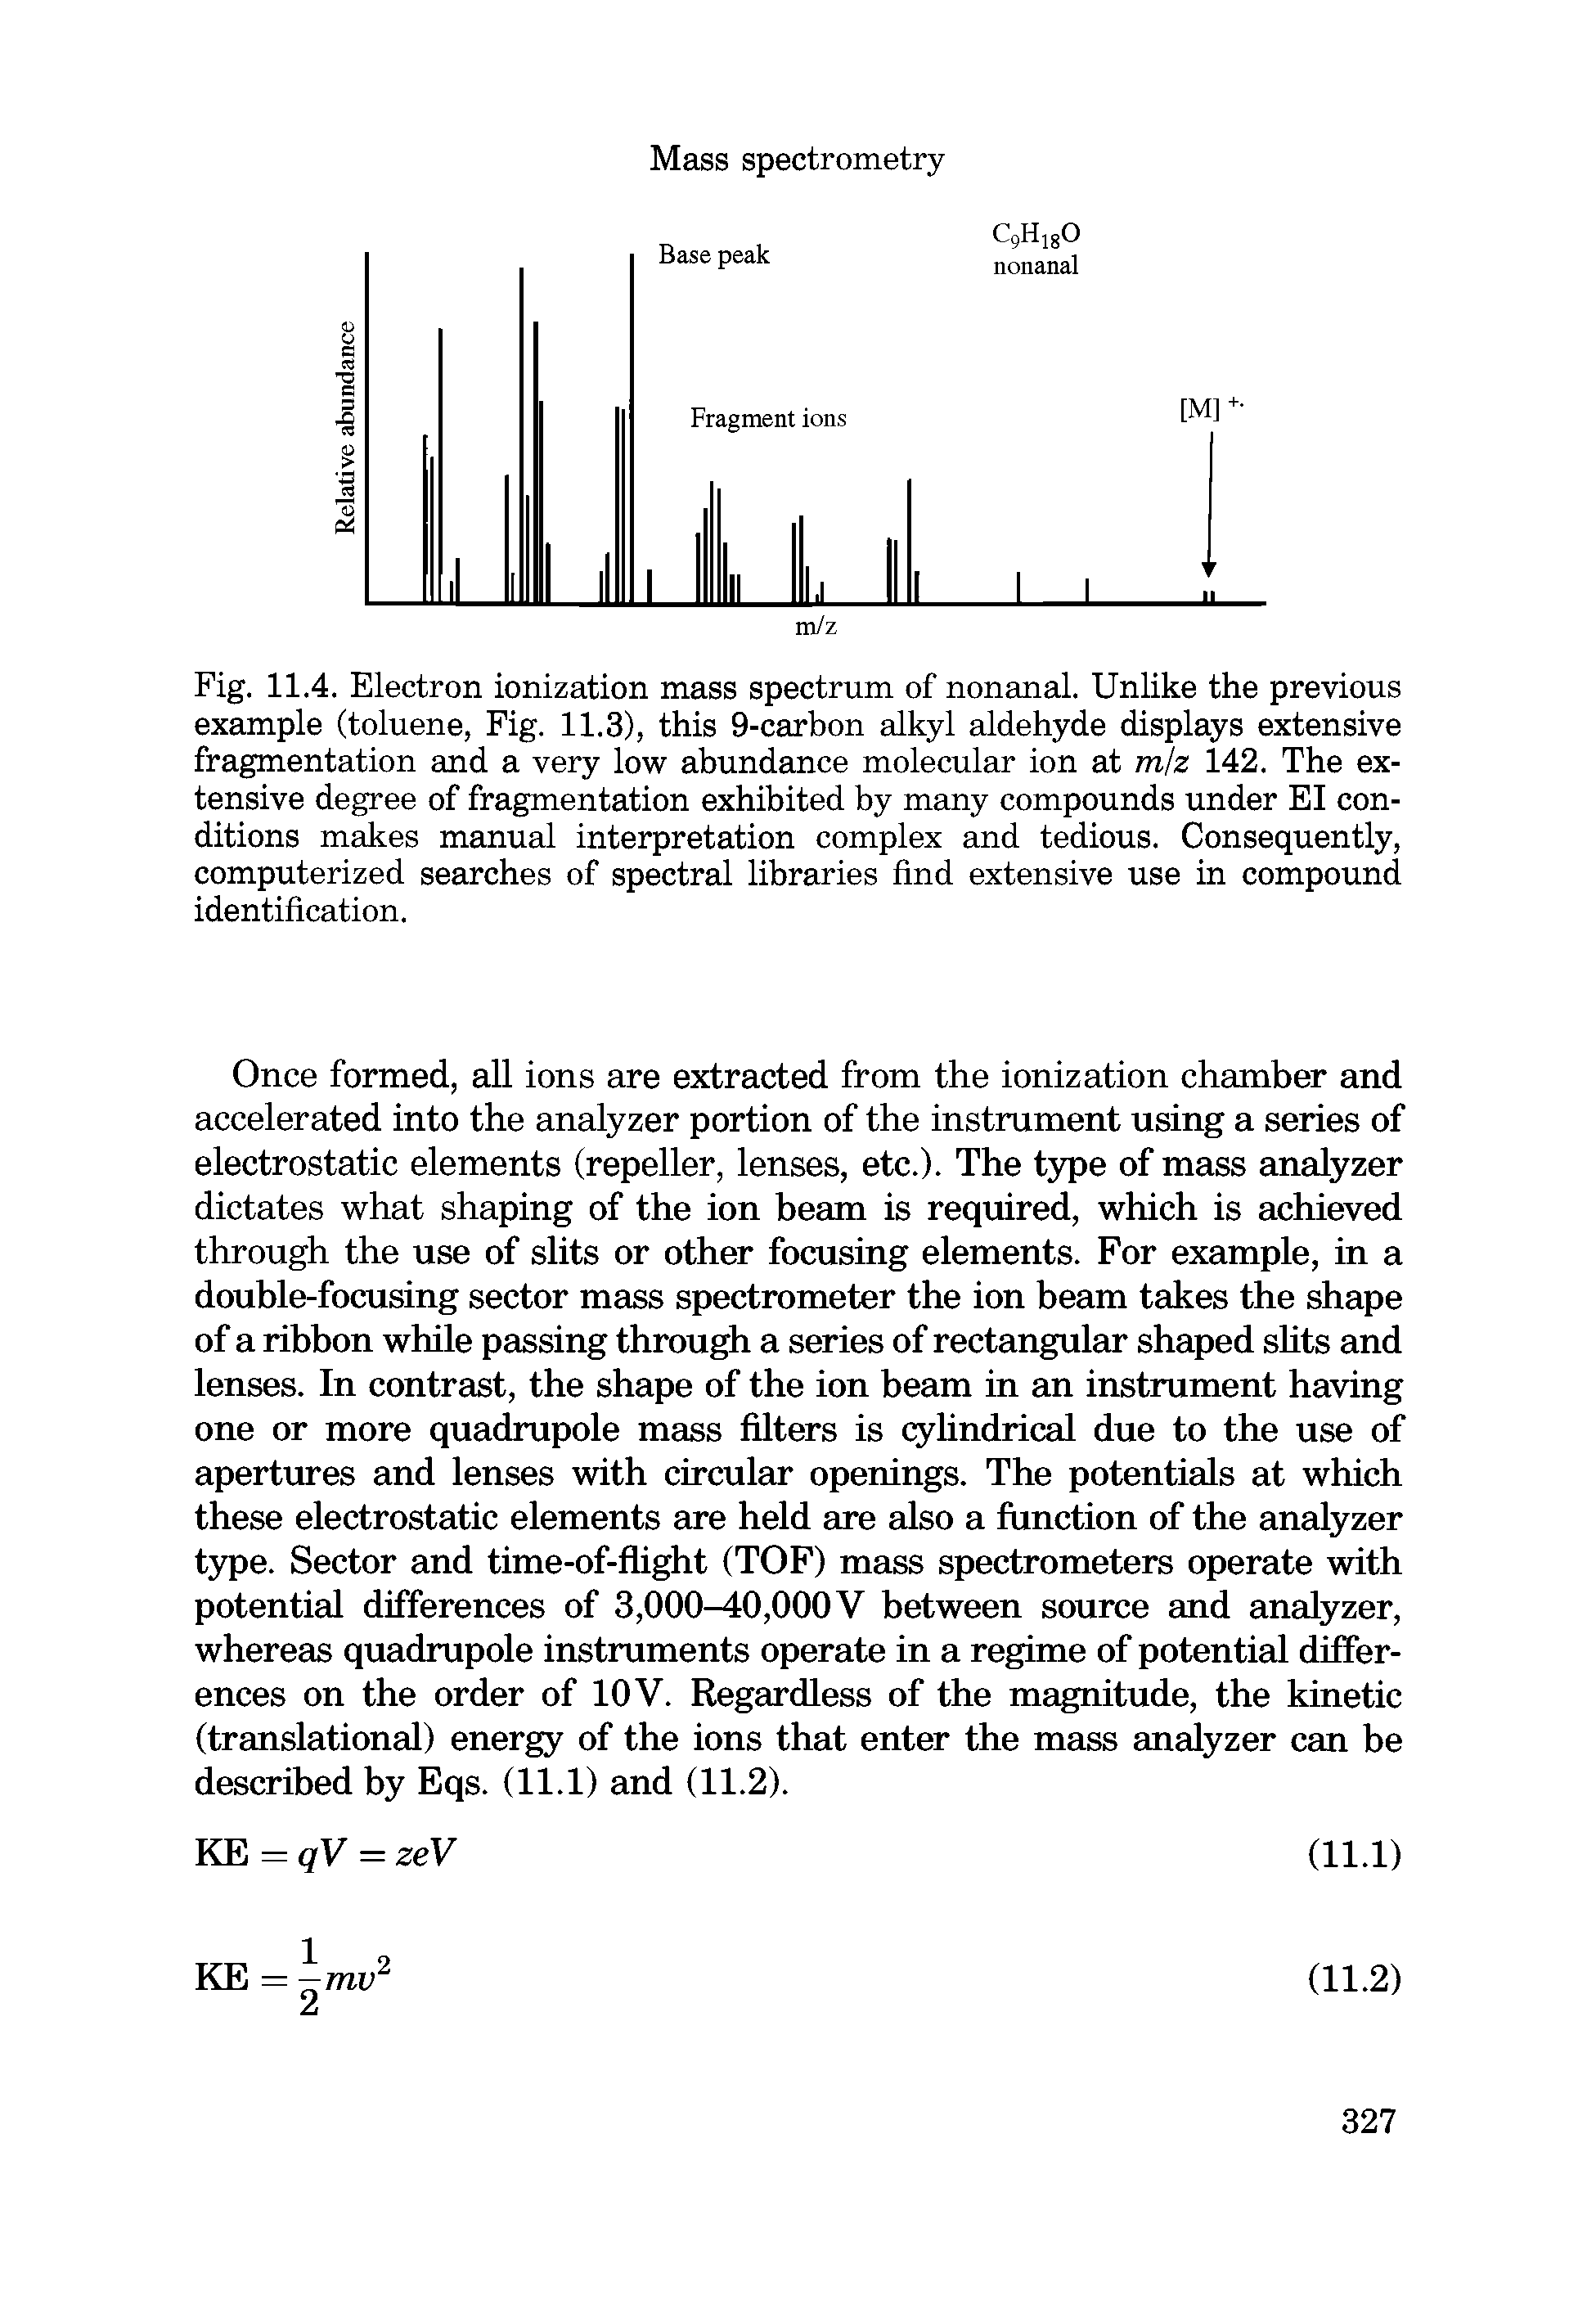 Fig. 11.4. Electron ionization mass spectrum of nonanal. Unlike the previous example (toluene, Fig. 11.3), this 9-carbon alkyl aldehyde displays extensive fragmentation and a very low abundance molecular ion at mlz 142. The extensive degree of fragmentation exhibited by many compounds under El conditions makes manual interpretation complex and tedious. Consequently, computerized searches of spectral libraries find extensive use in compound identification.